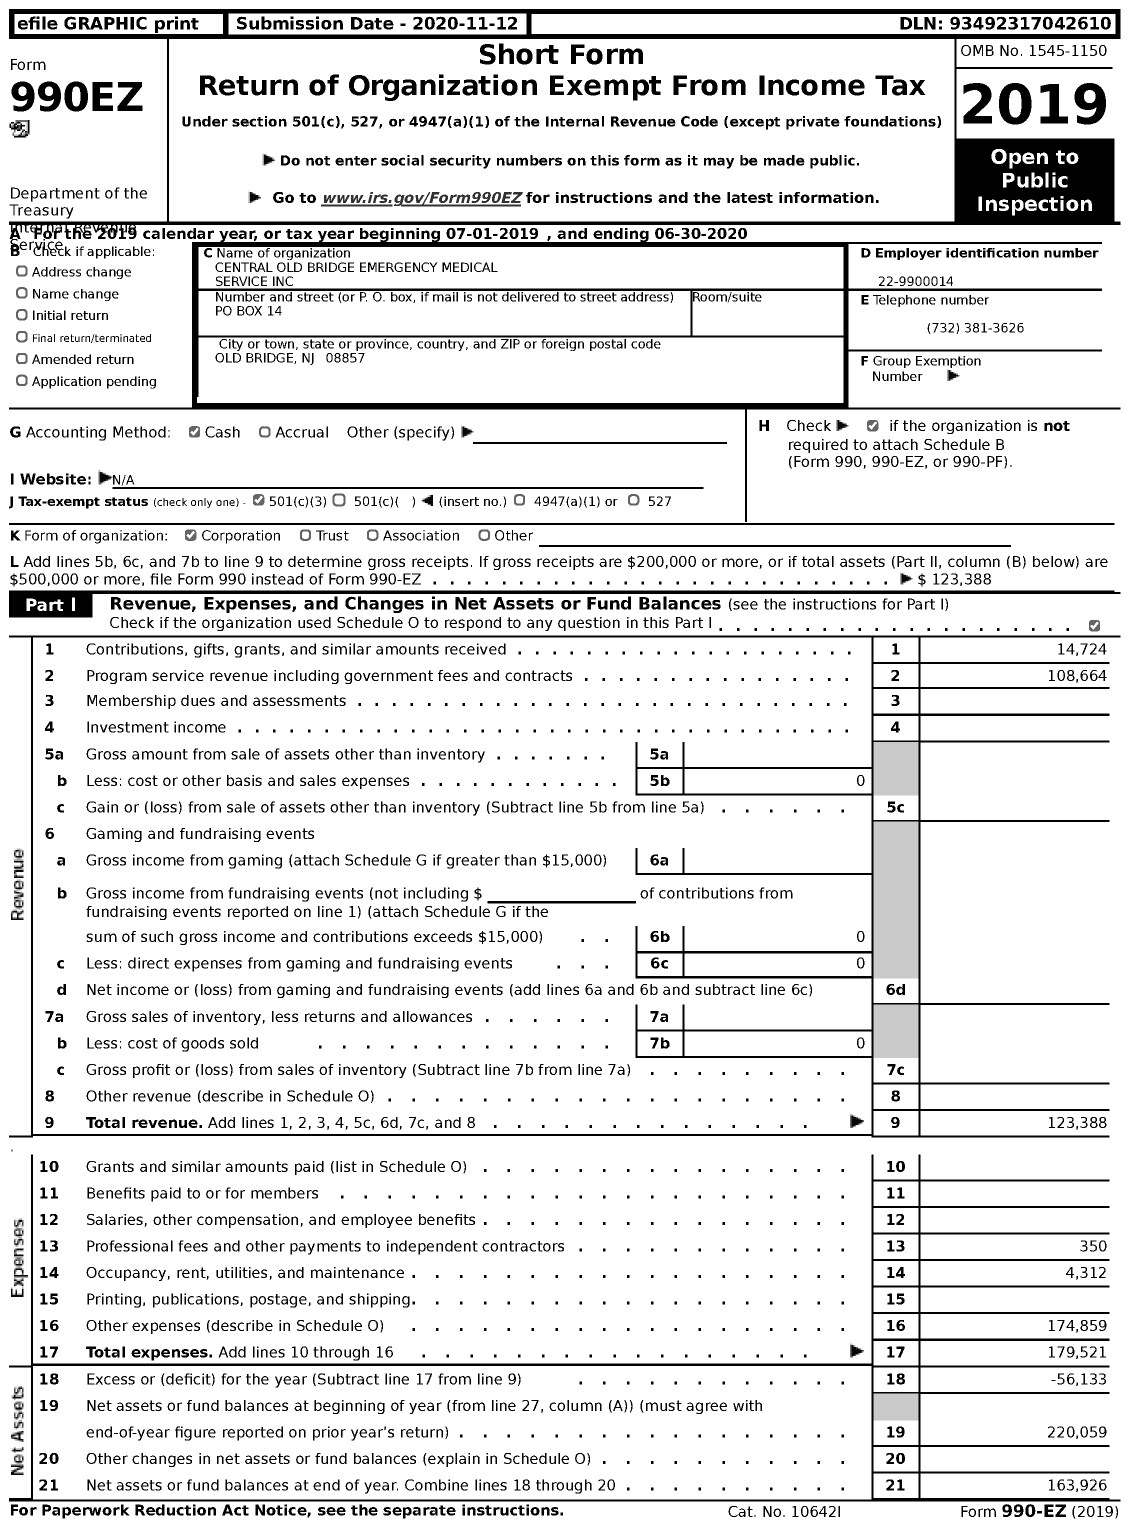 Image of first page of 2019 Form 990EZ for Central Old Bridge Emergency Medical Service